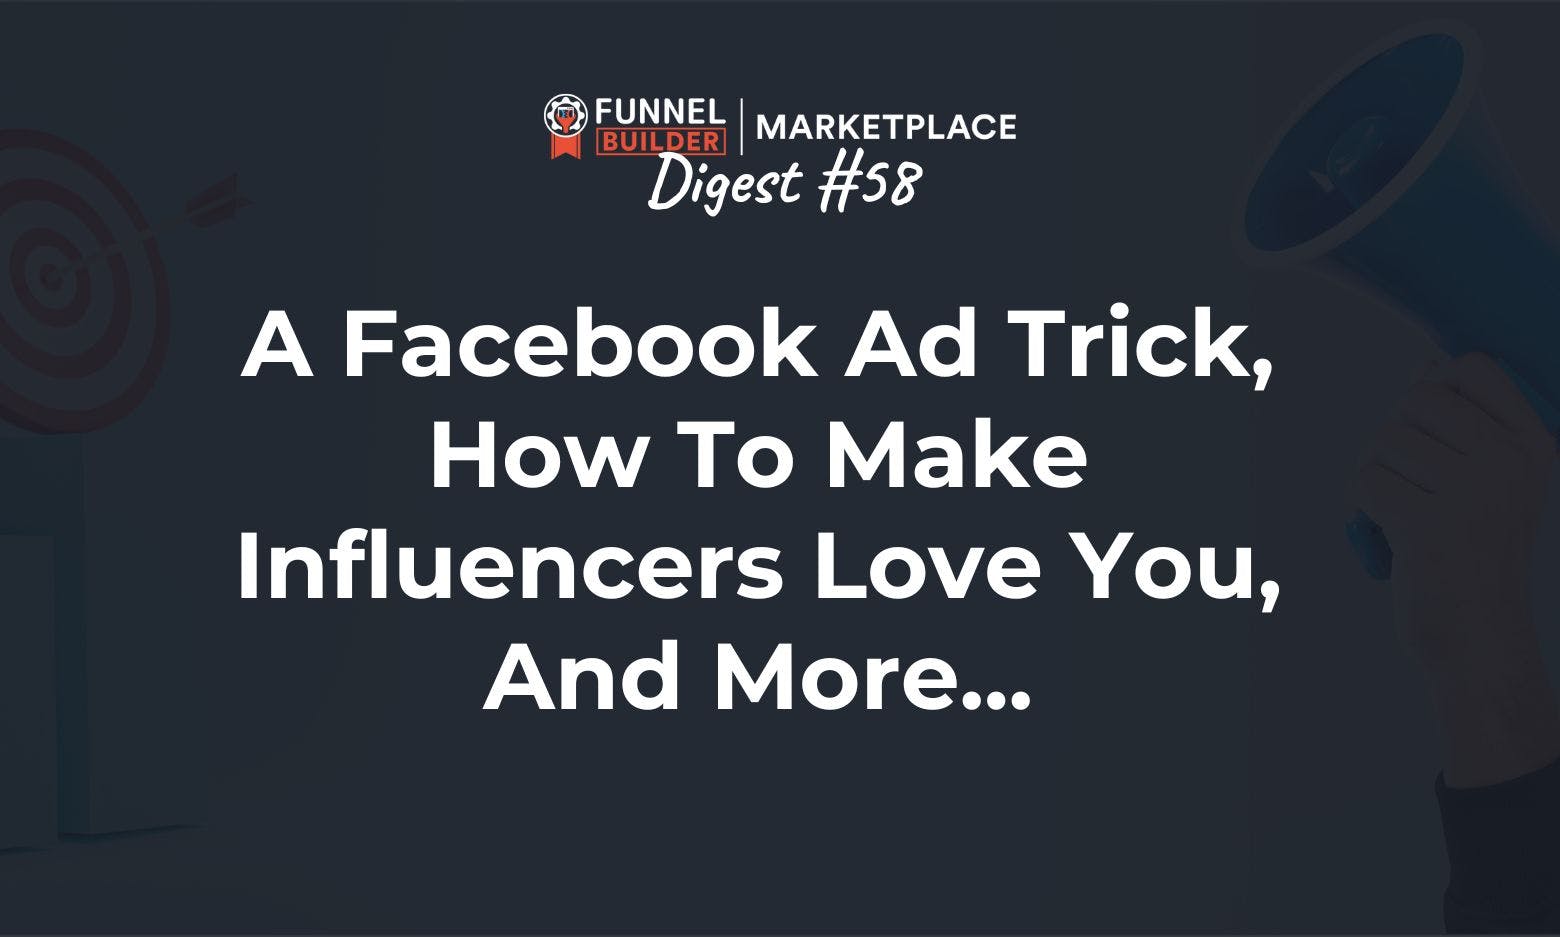 FBM Digest #58: A Facebook ad trick, how to make influencers love you, and more...